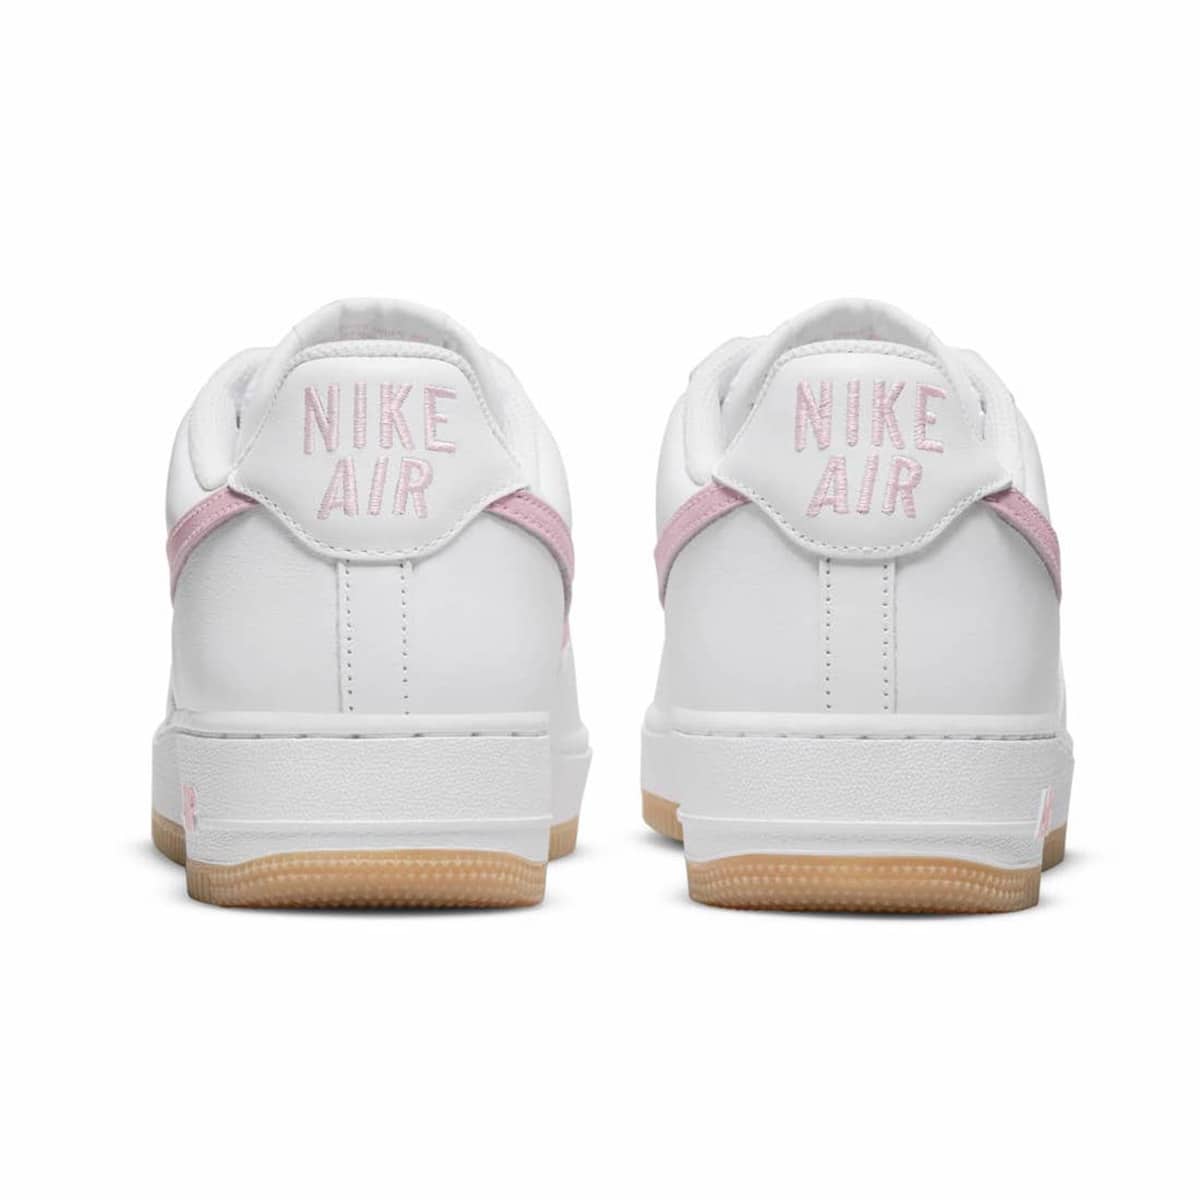 Nike Air Force 1 Low Color of the month White Pink DM0576-101 6